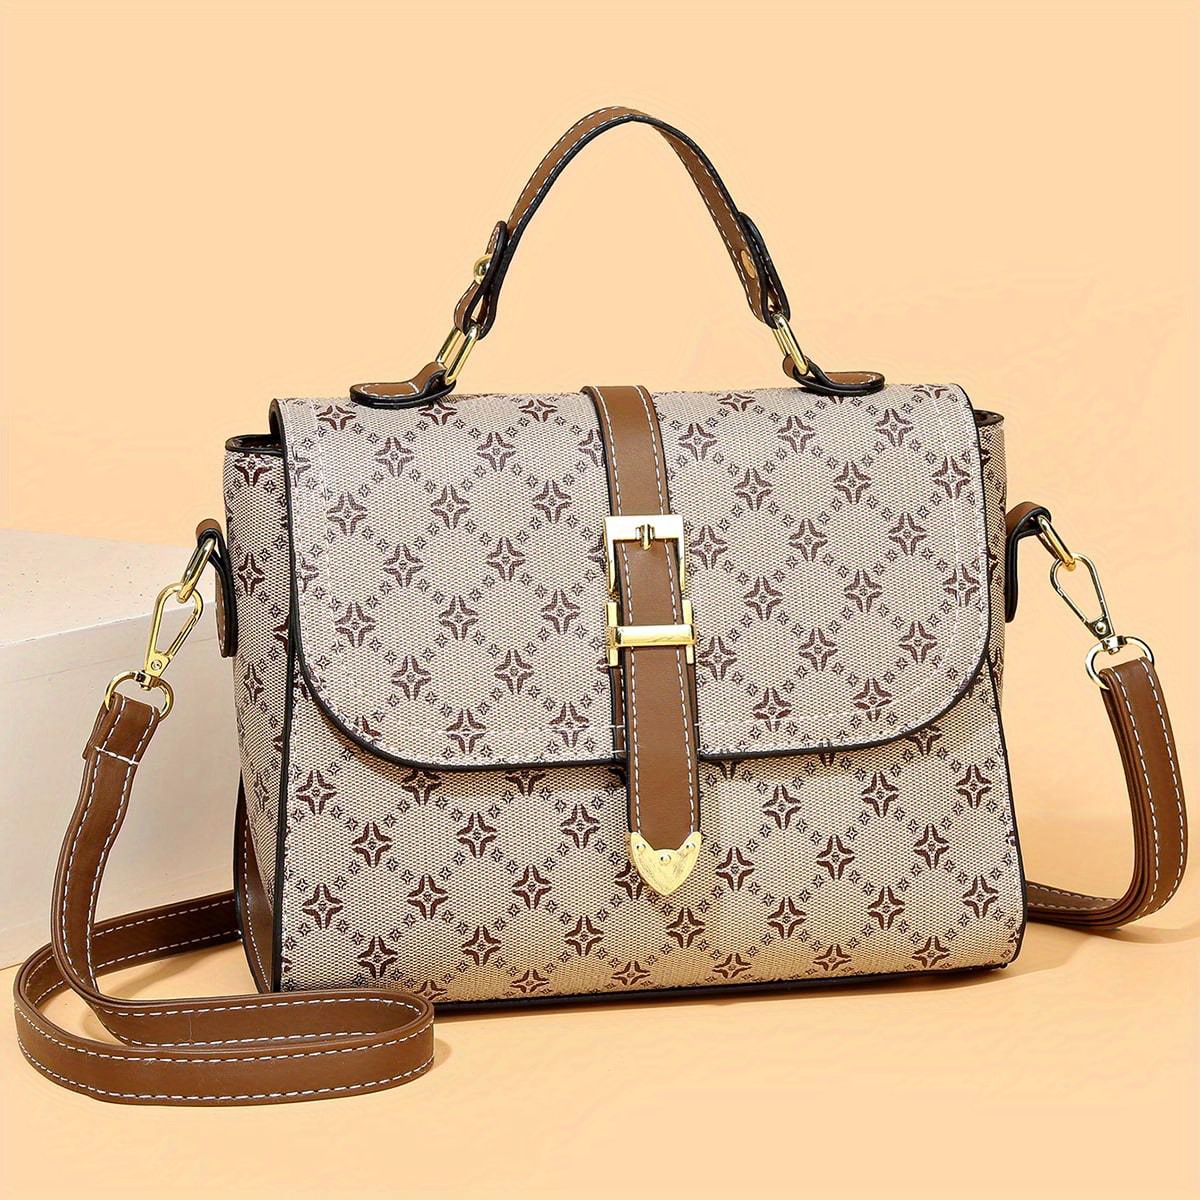 1 Pc Vintage Geometric Pattern Shoulder Bag With Zipper Side Pocket,  Suitable For Daily Use, Date, And Gift For Women